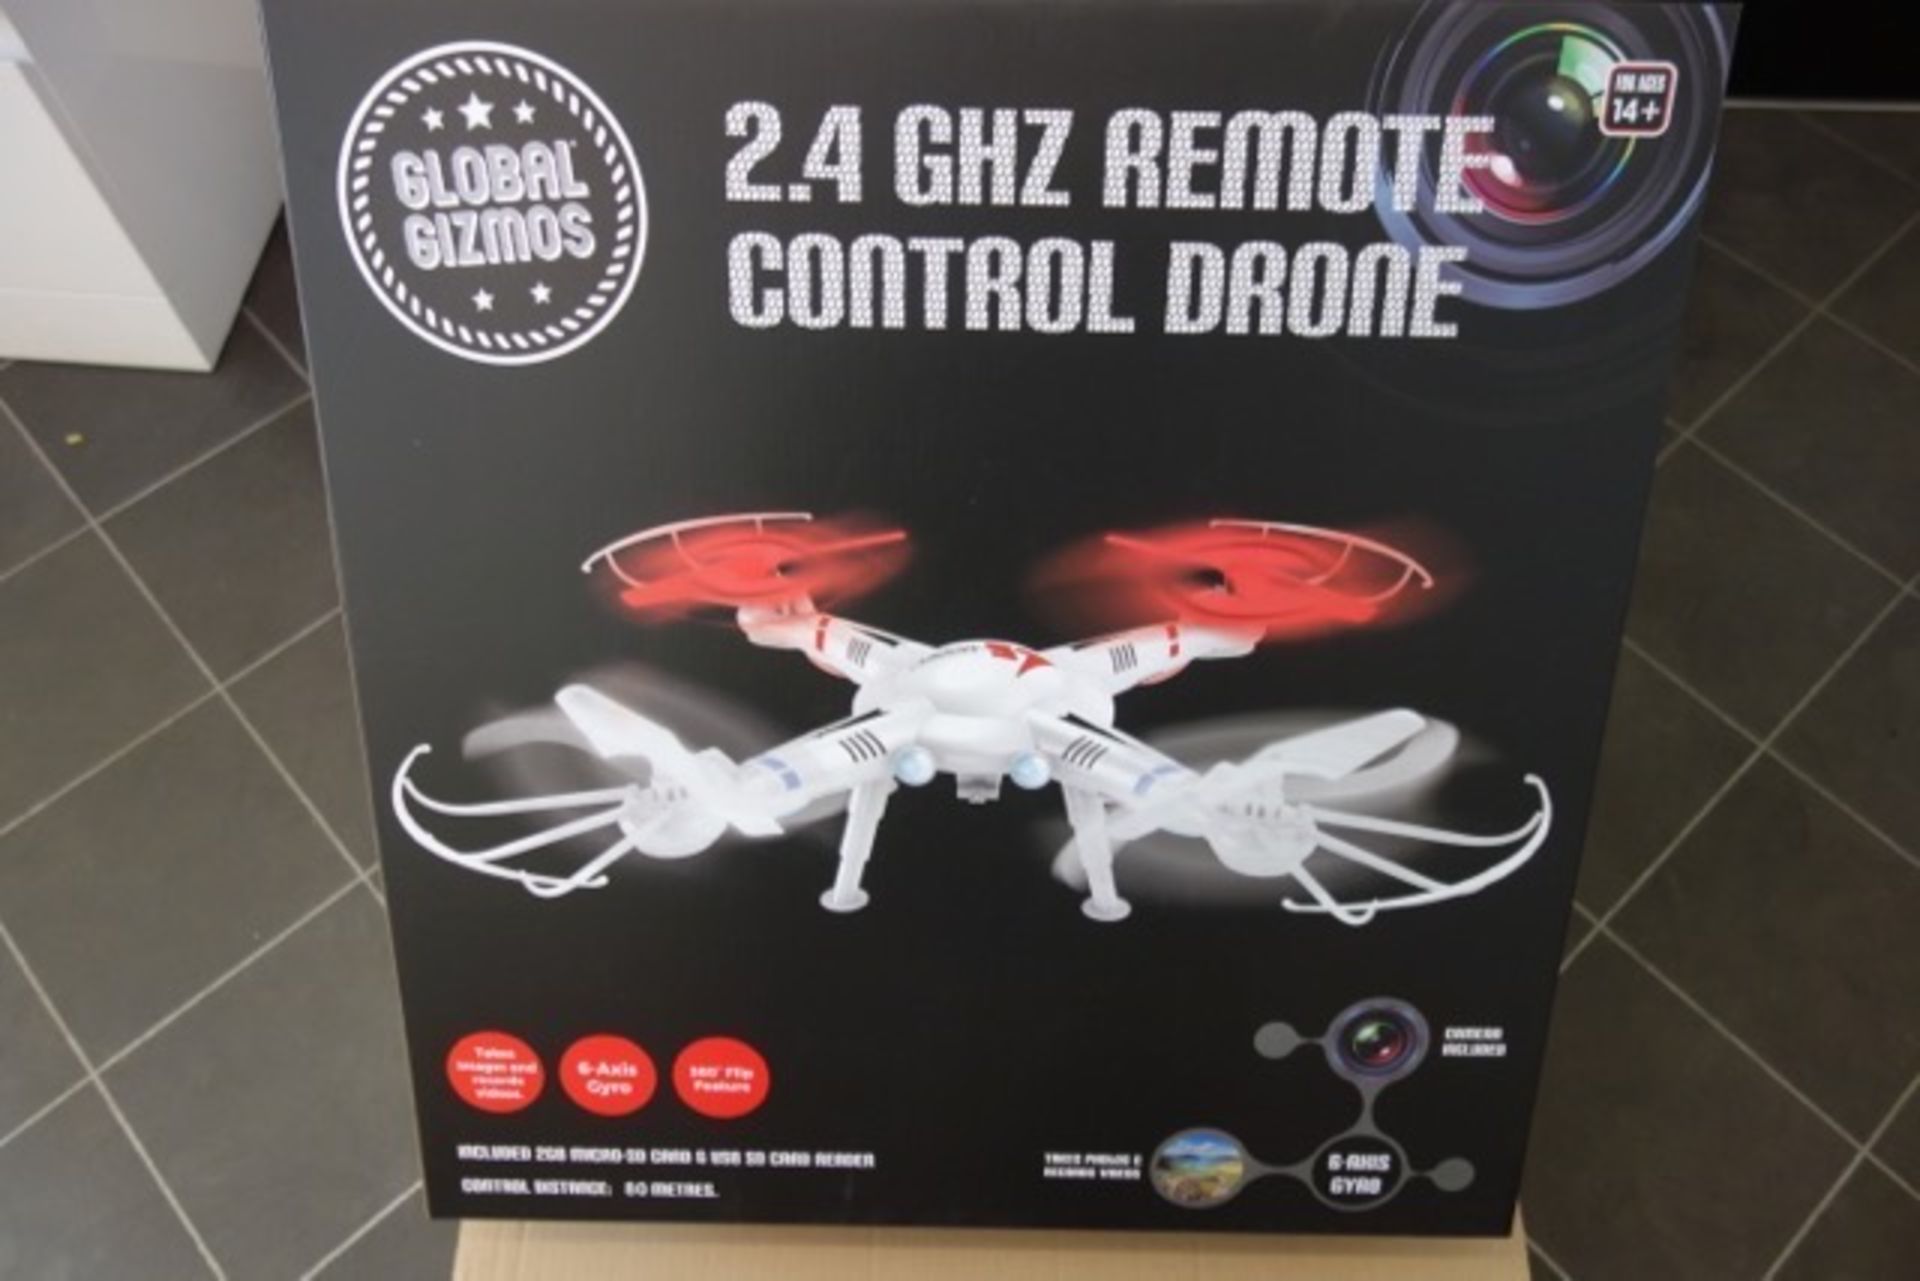 4 x Brand New Global Gizmos 2.4GHZ Remote Control Drone. Takes images & recordes videos, 6 axis